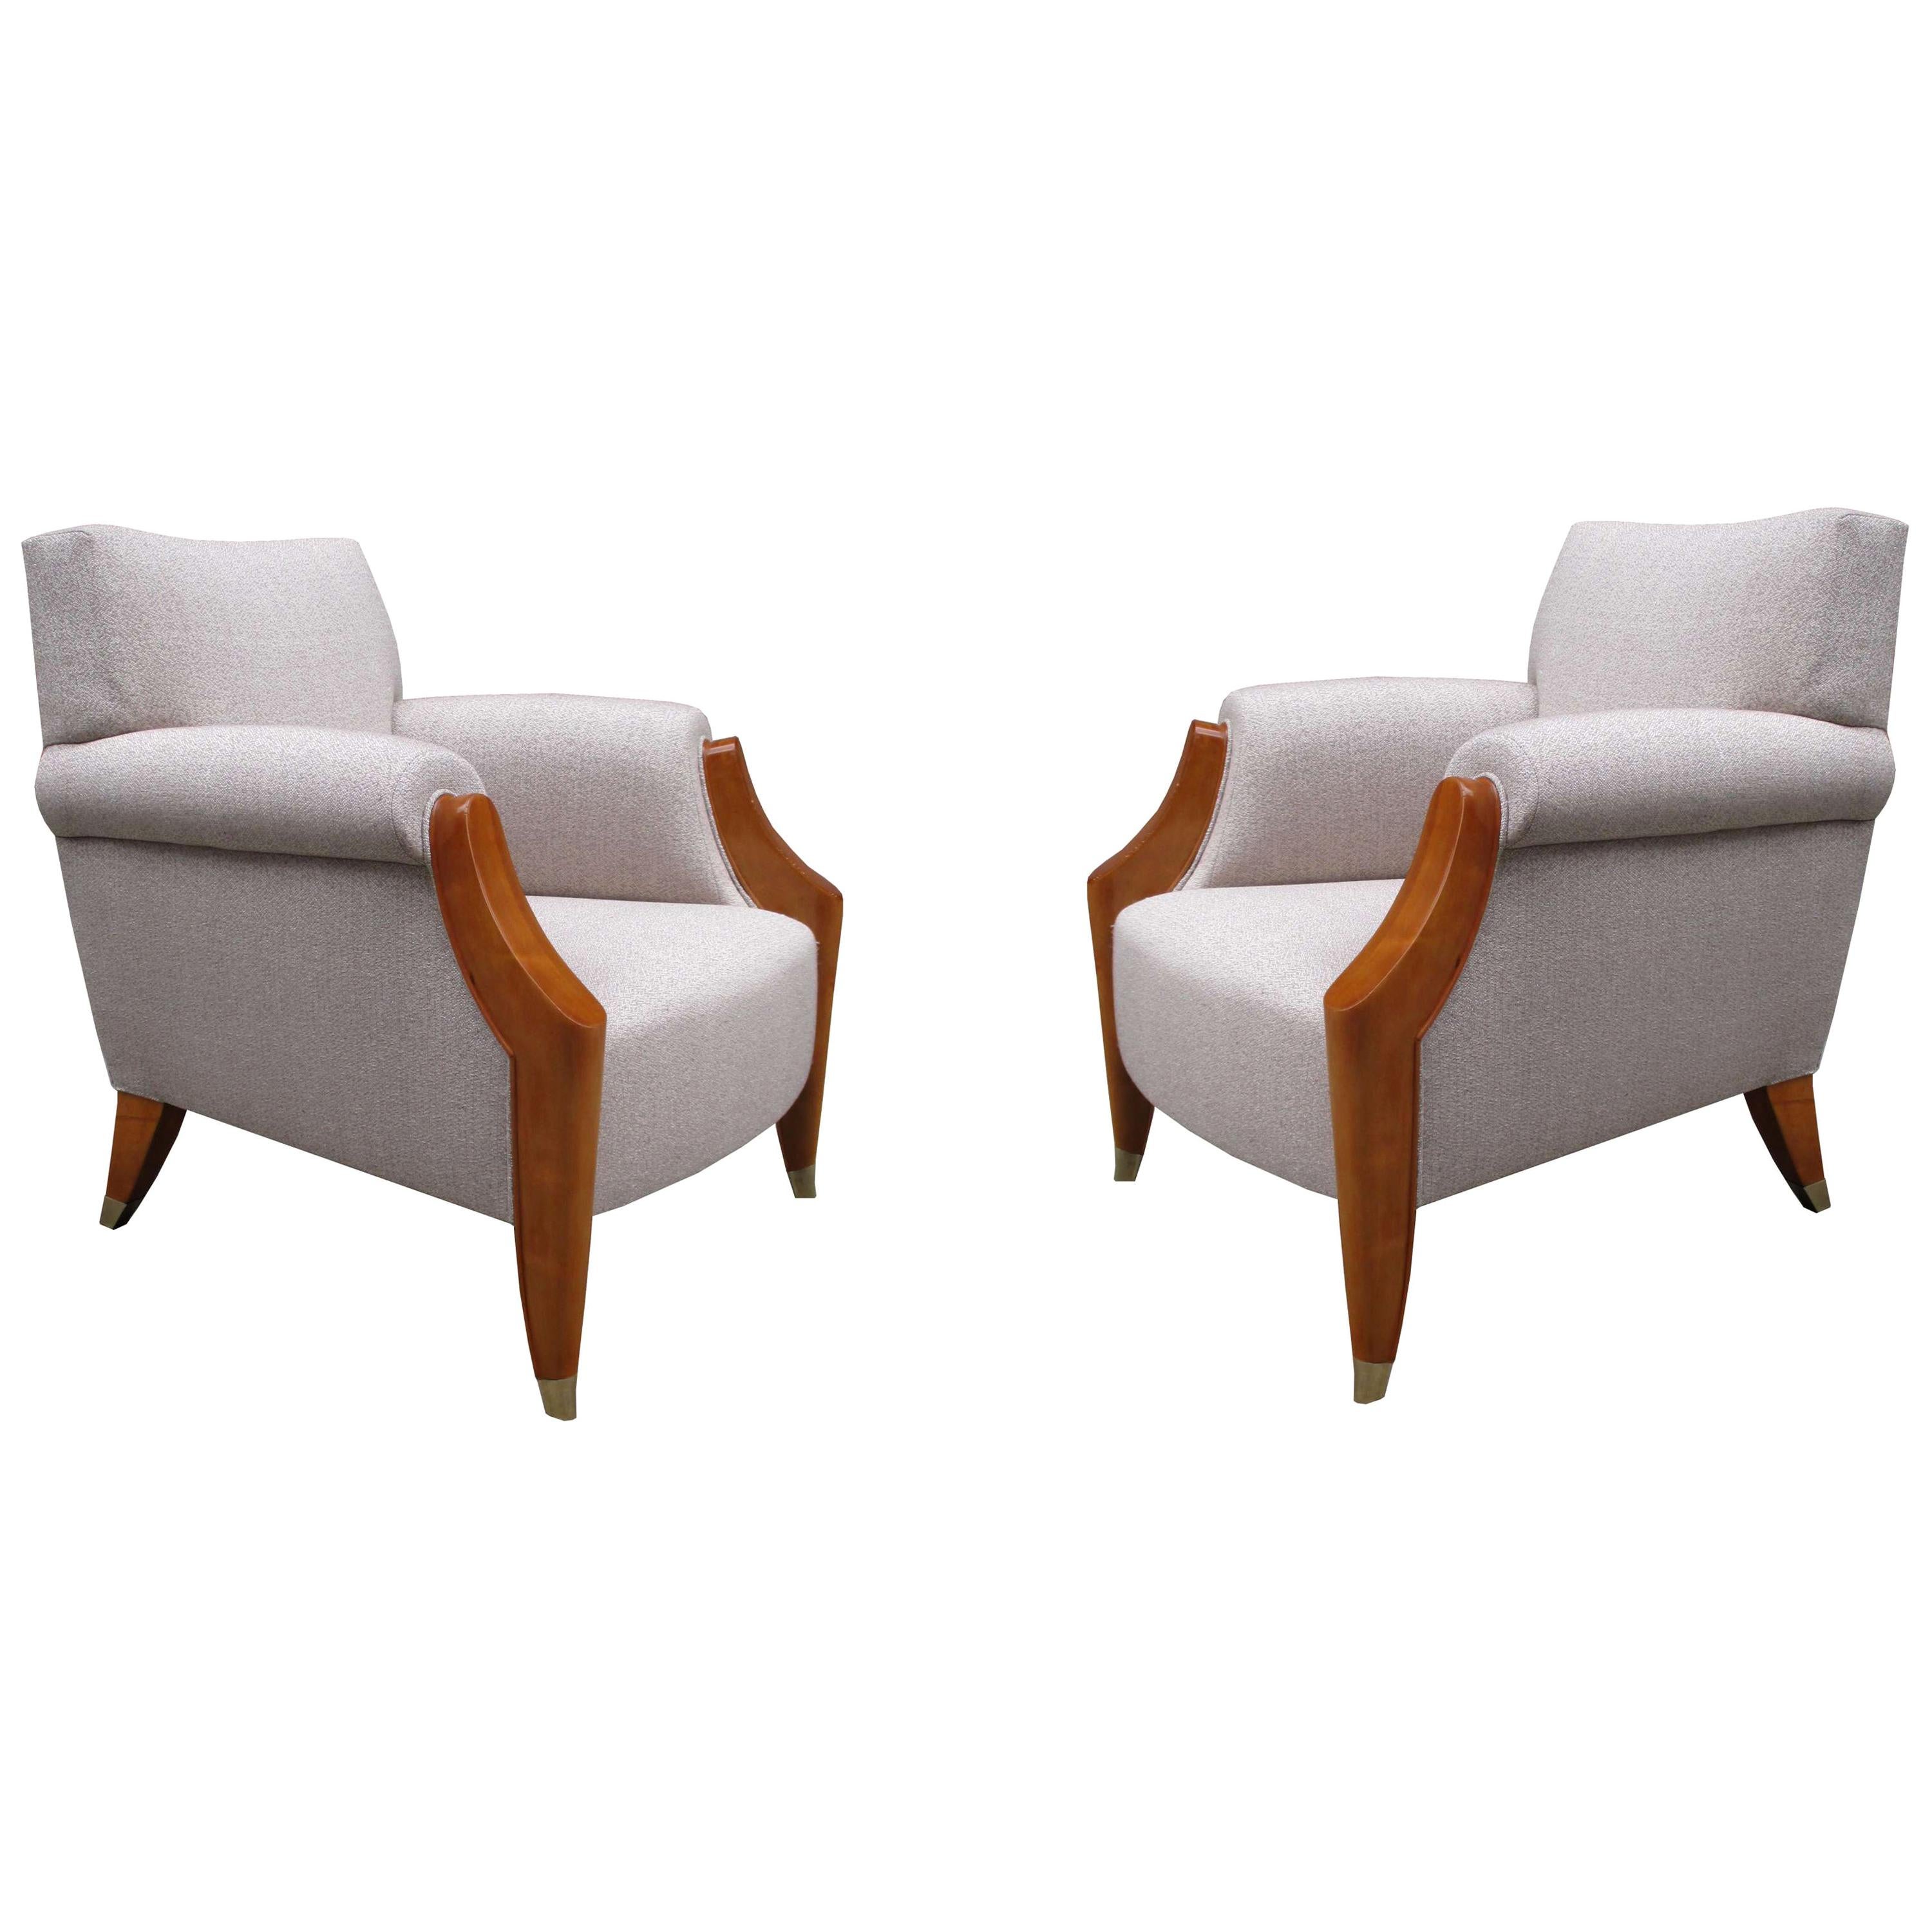 Pair of French 1940s Style Club Chairs